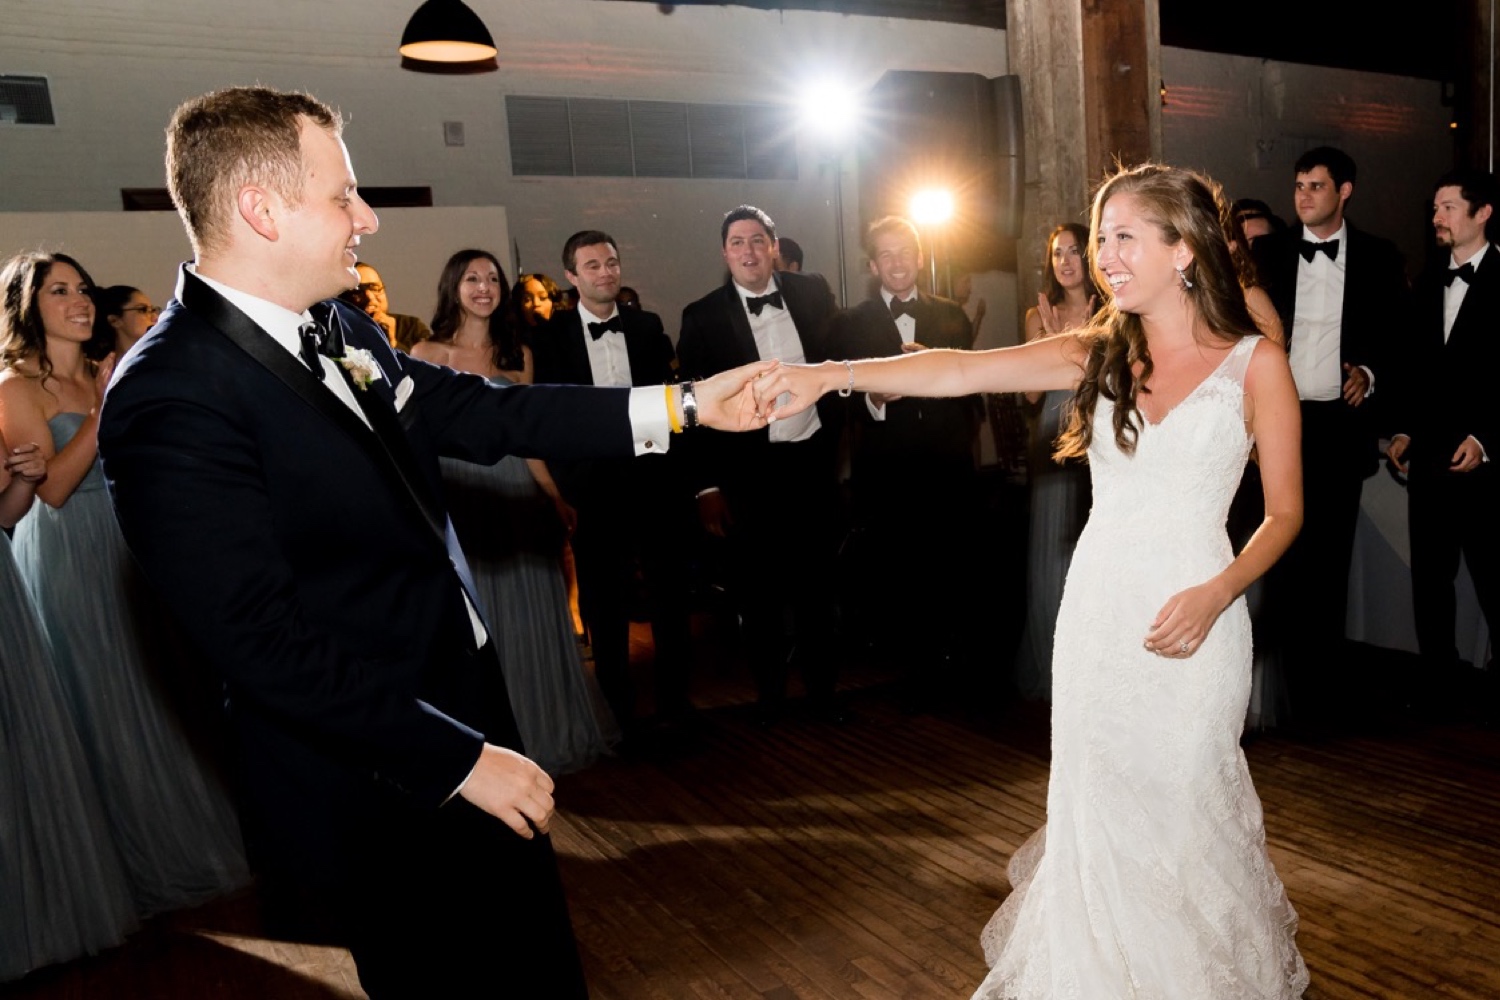 A newly wedded couple's first dance during a wedding reception at Liberty Warehouse, Brooklyn New York. 